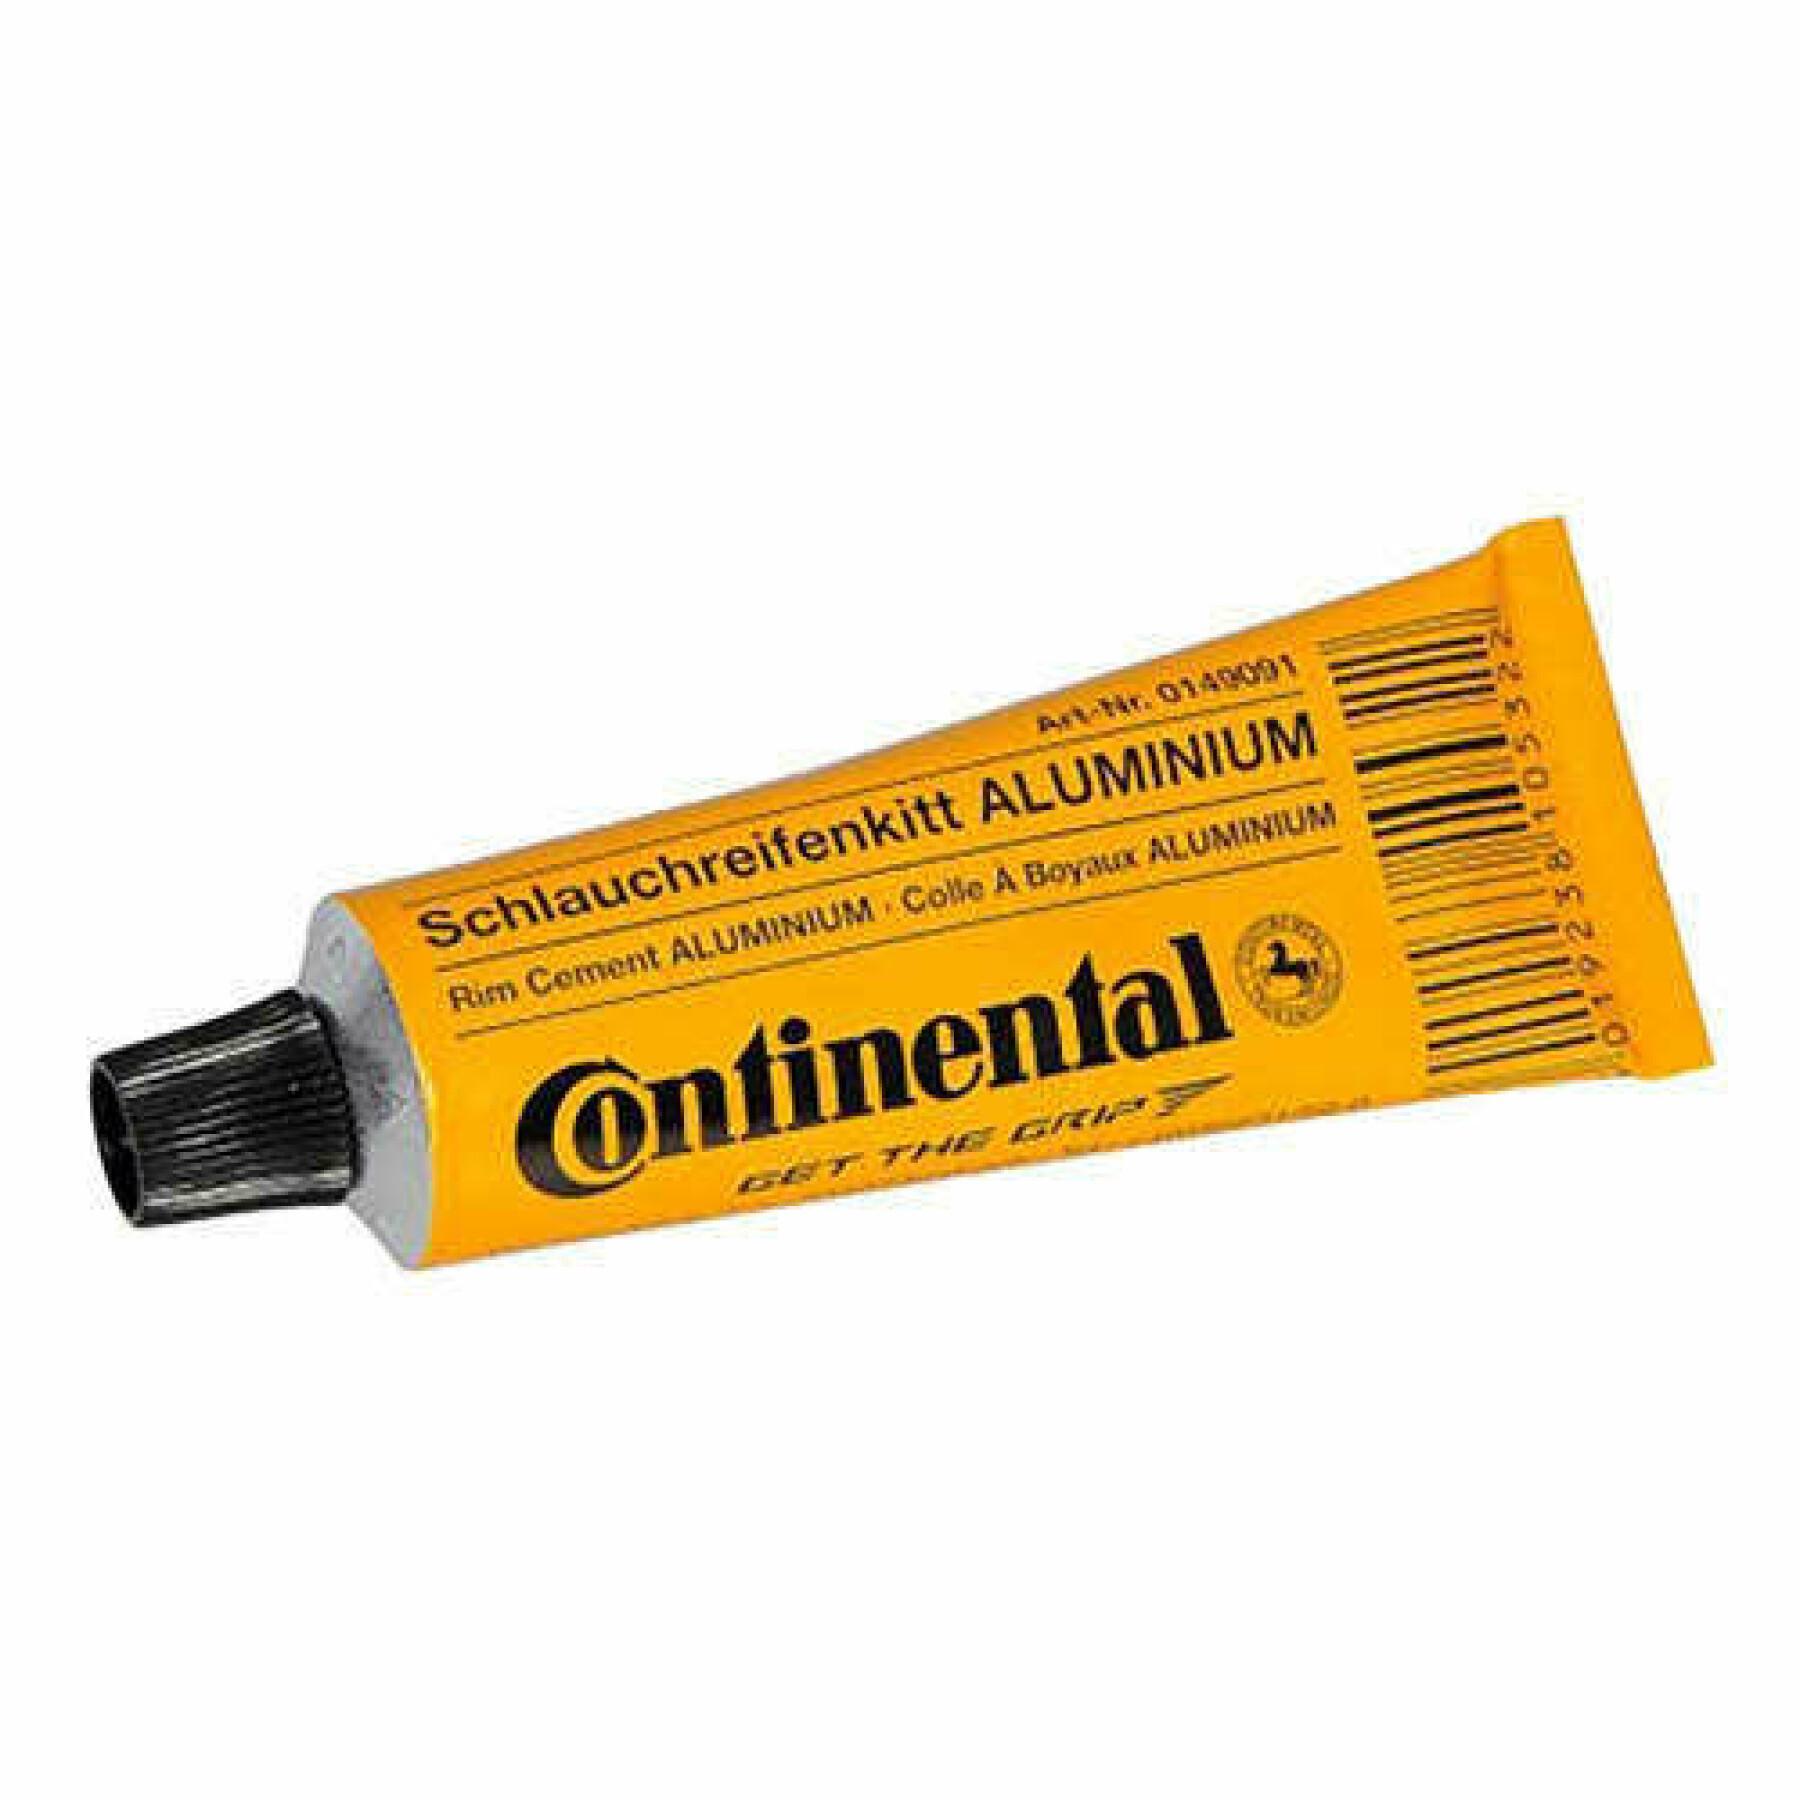 Box of 12 tubes of hose glue Continental